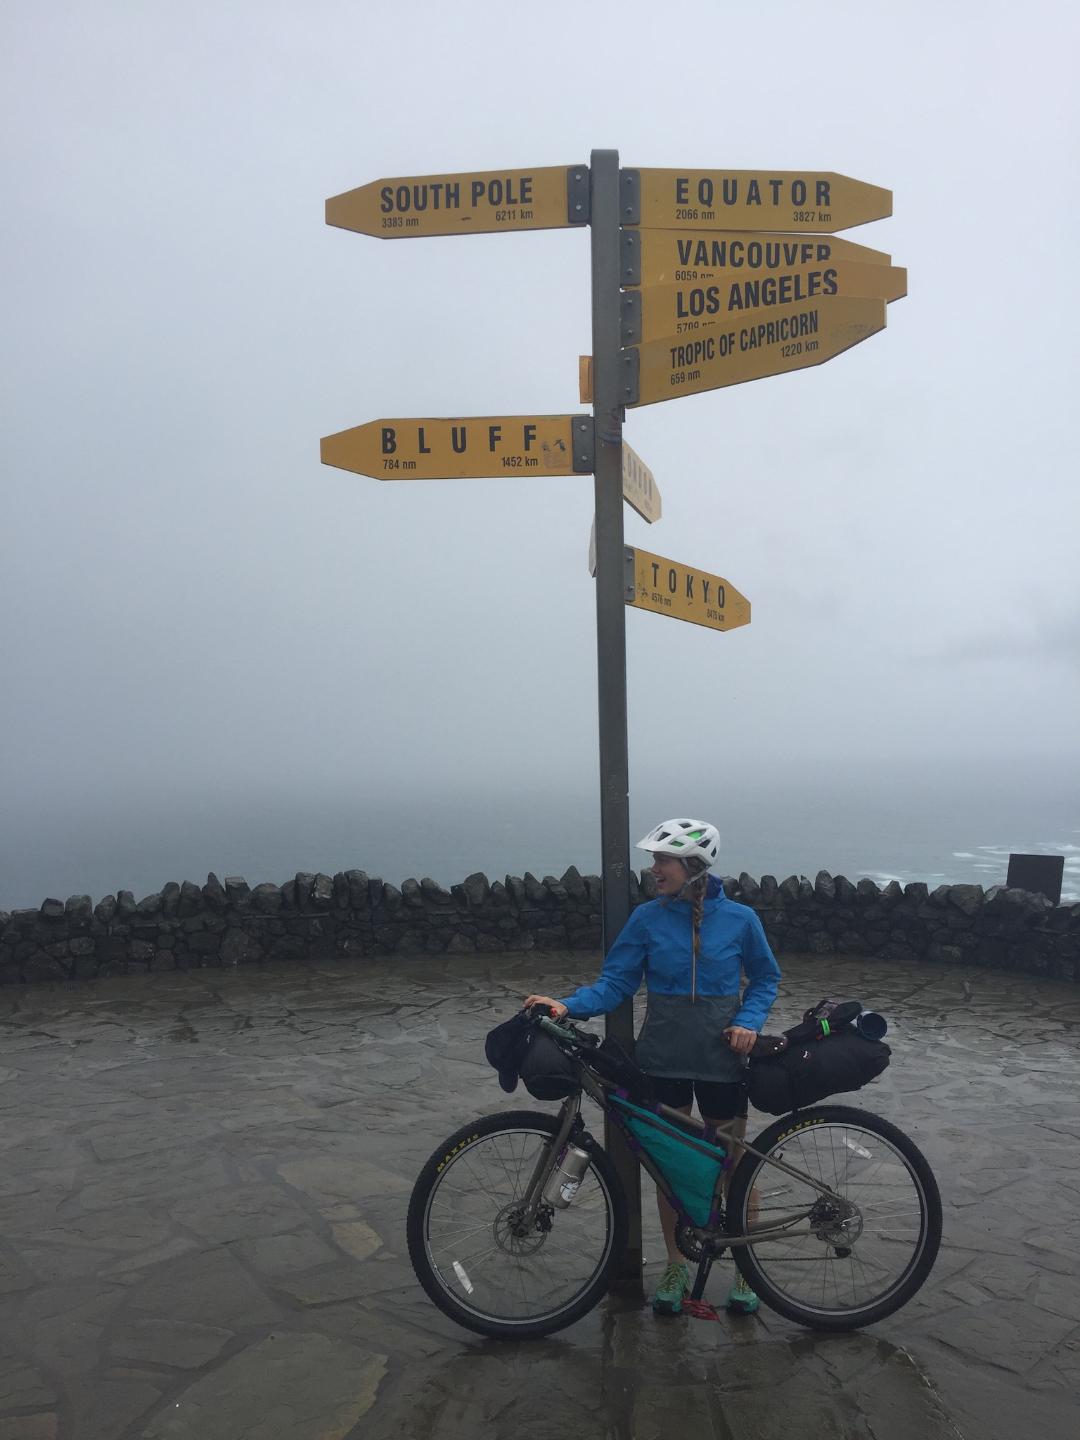 A woman stands with her loaded bicycle underneath signs pointing to important places in the world on a wet, misty coast.